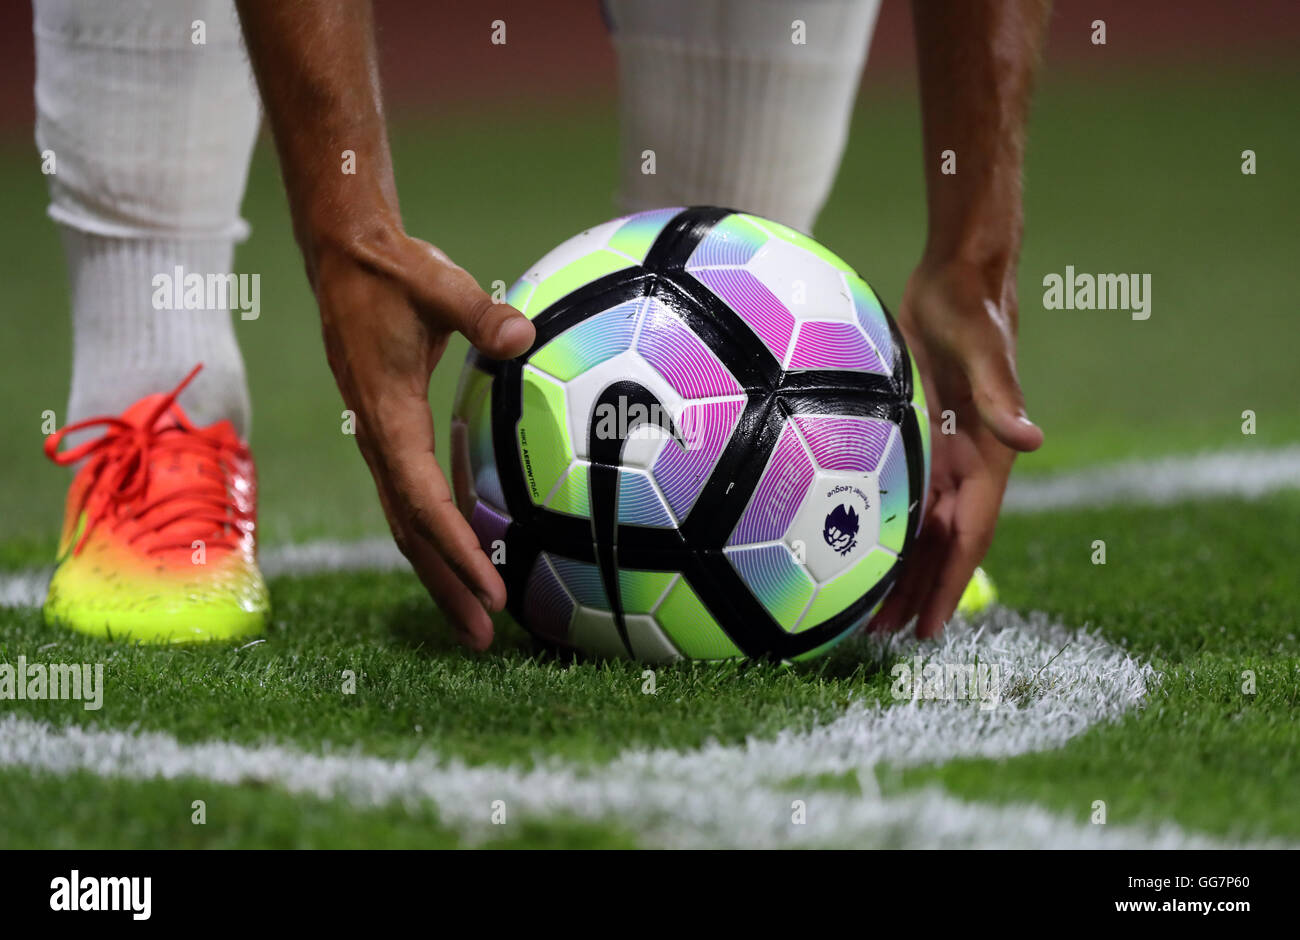 Wennen aan Ooit Shinkan An Espanyol player places the new Nike Ordem 2016-17 Premier League match  ball in the corner during the pre-season match at St Mary's Stadium,  Southampton Stock Photo - Alamy